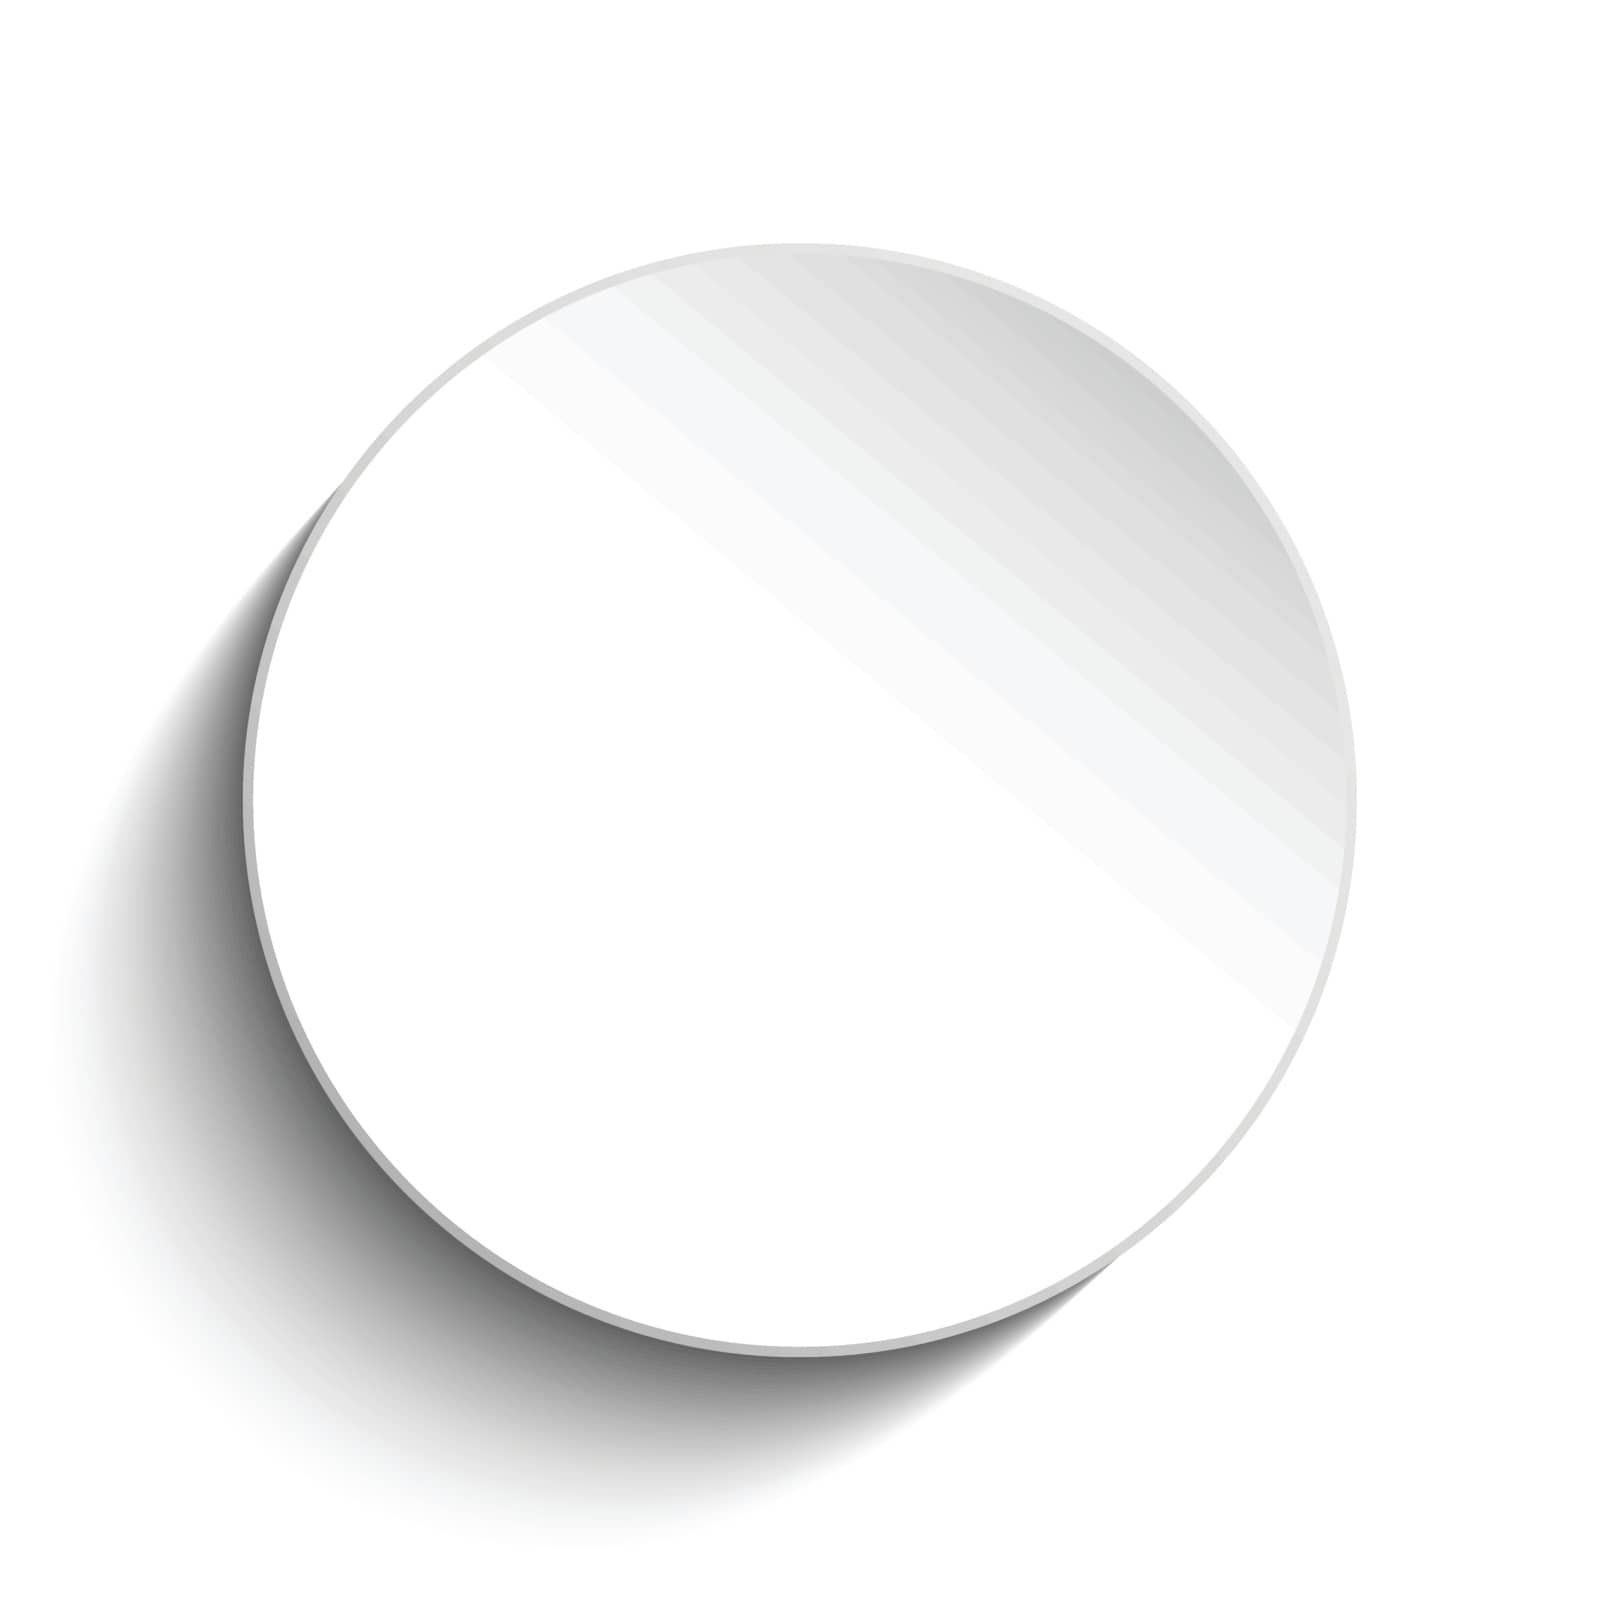 White Circle Button on White Background by gubh83